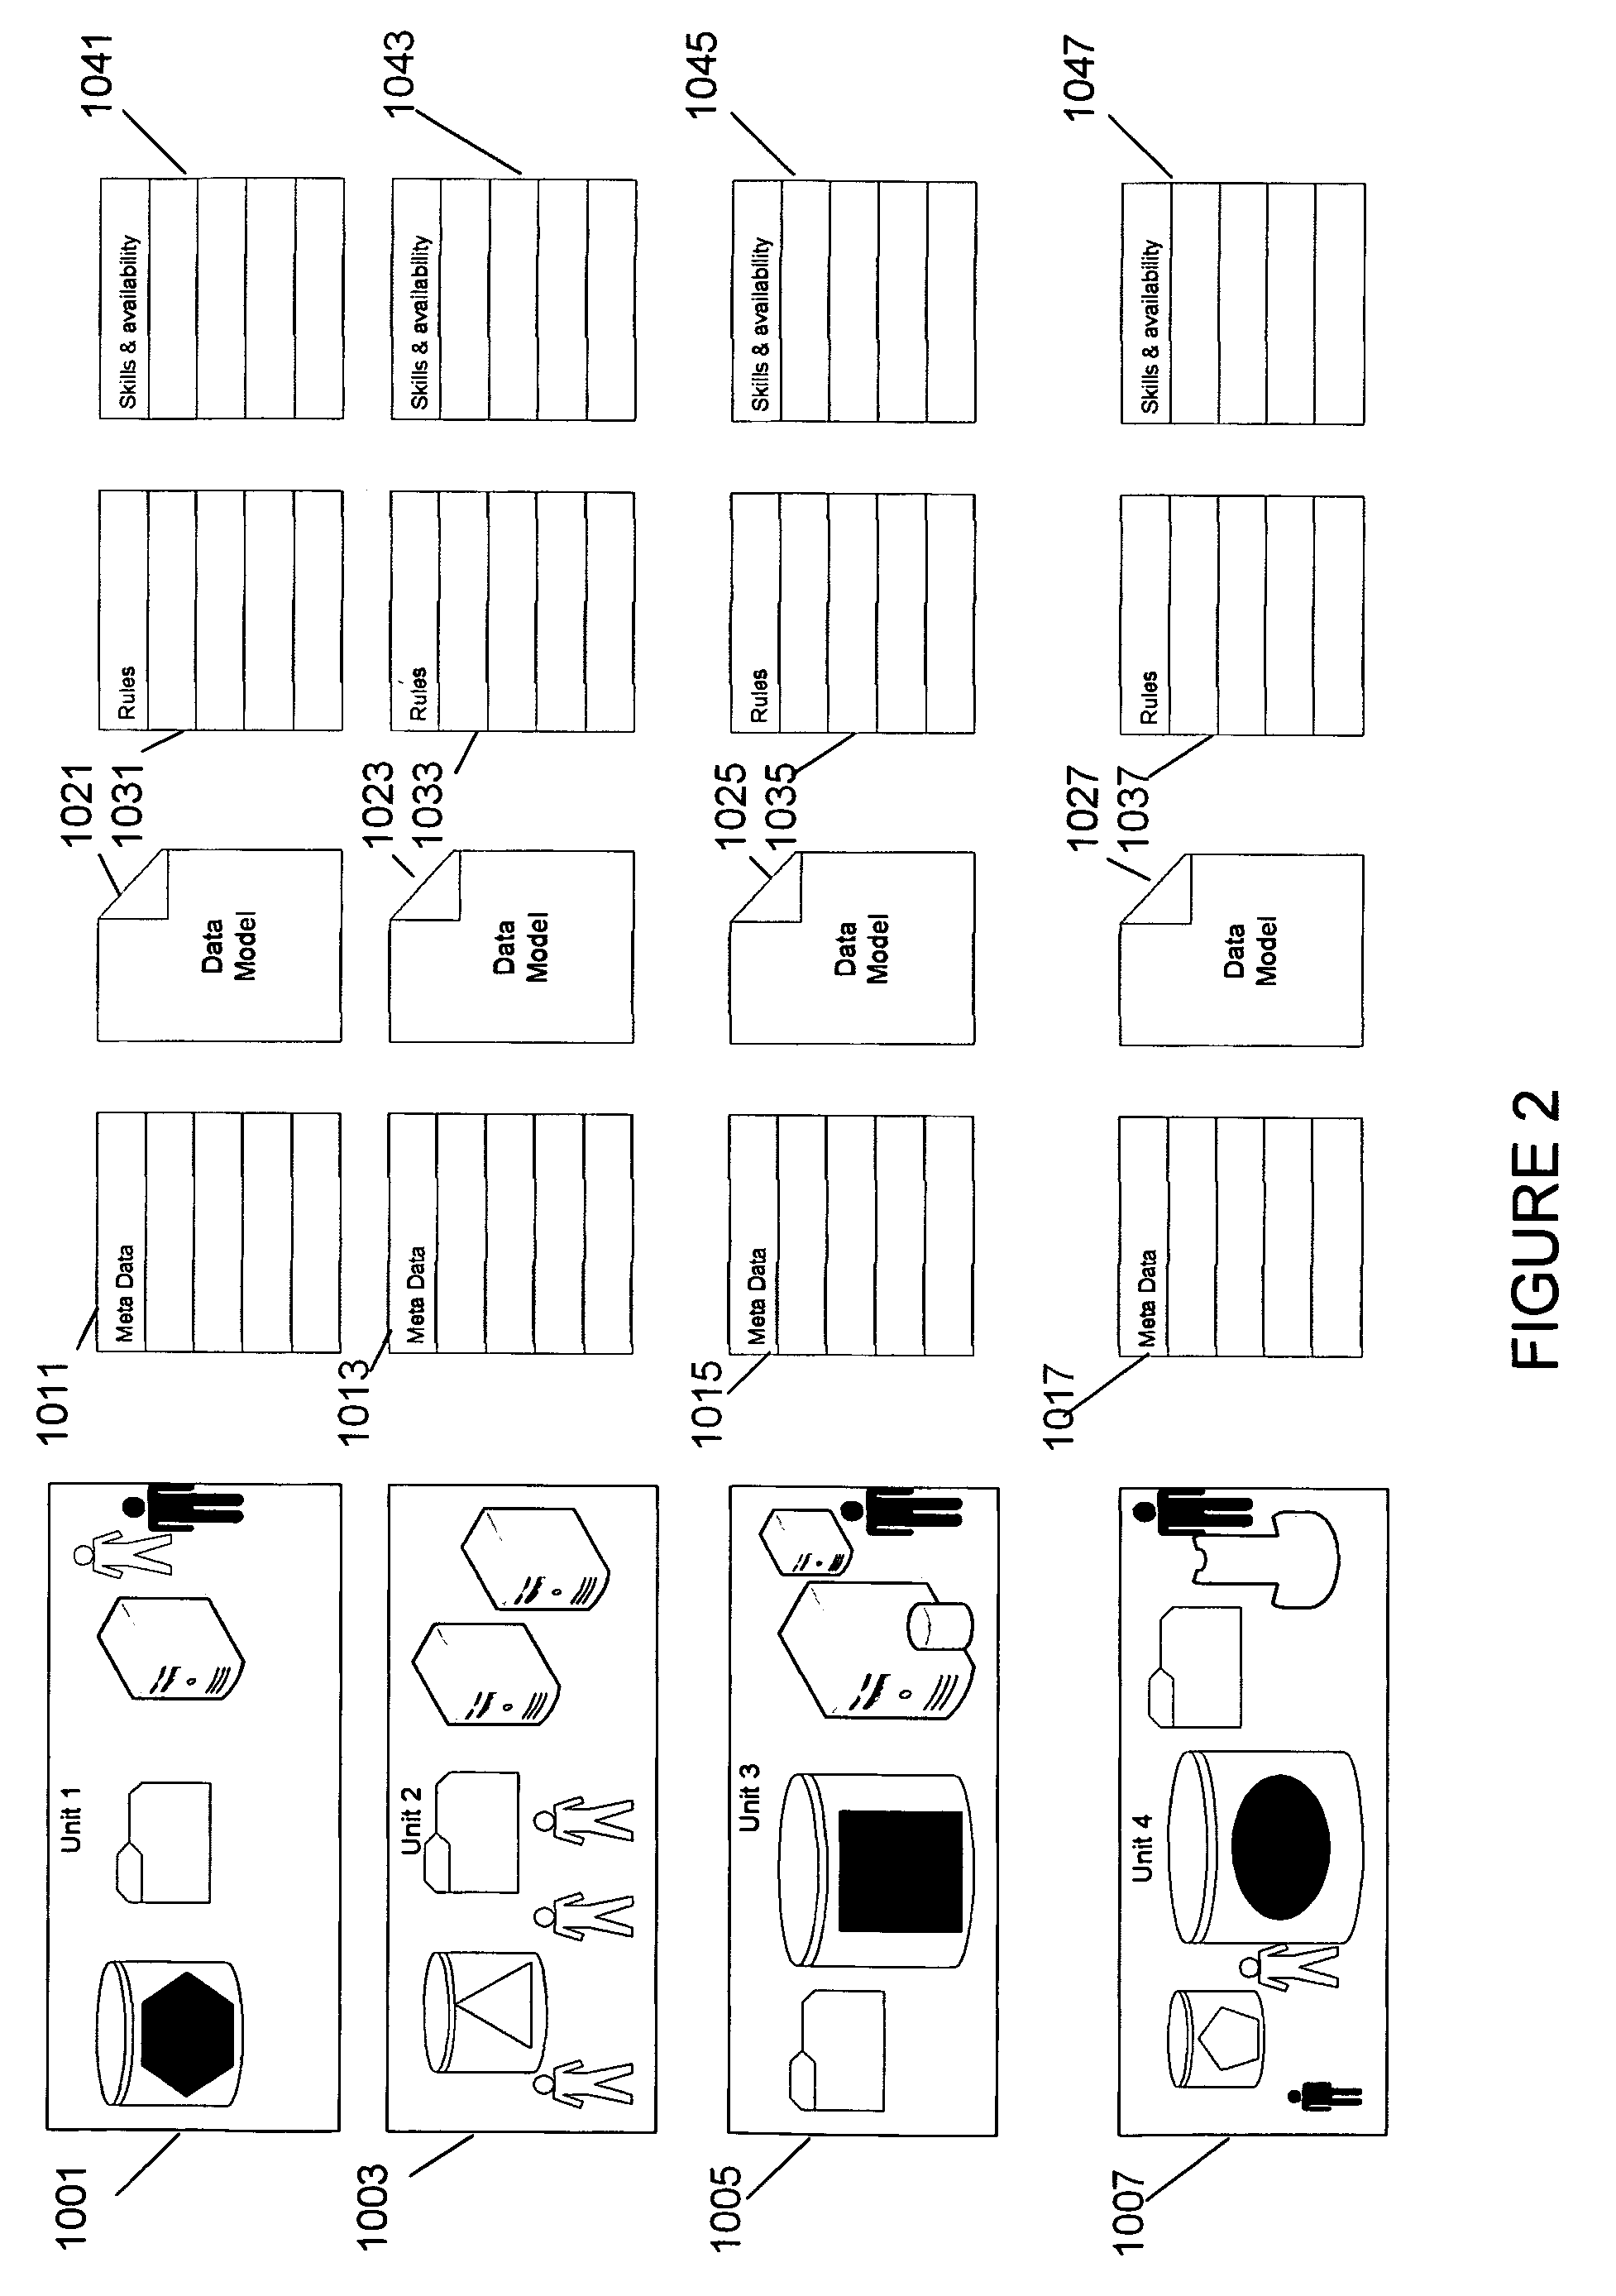 System and method for optimizing federated and ETL'd databases having multidimensionally constrained data